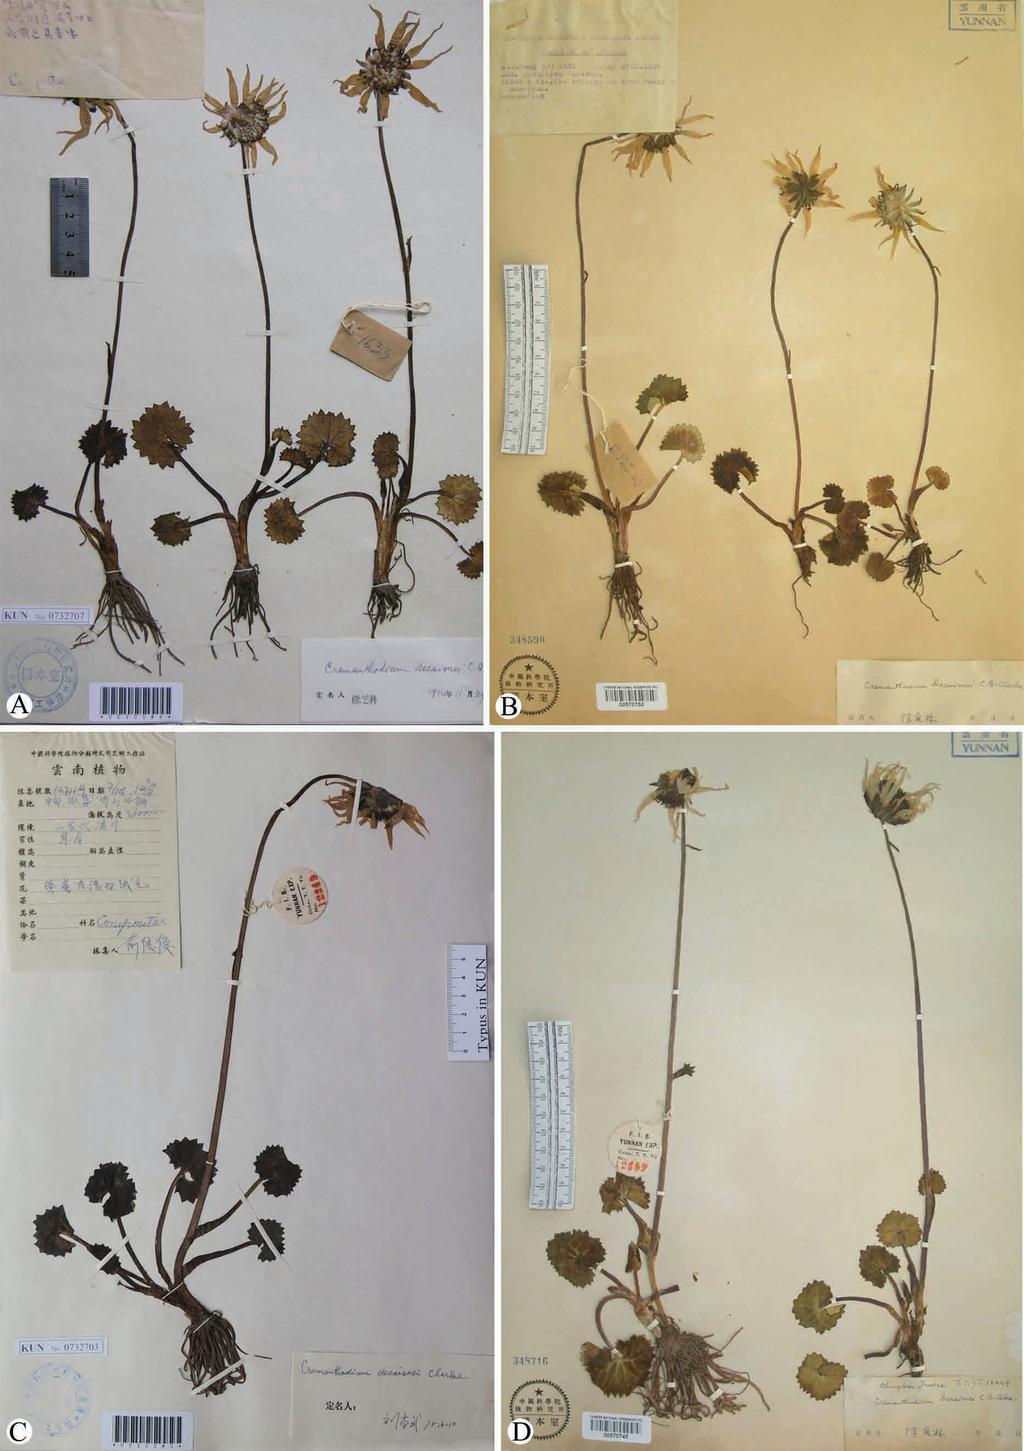 FIGURE 6. Specimens of Cremanthodium decaisnei (previously misidentified as C. citriflorum). A. China, Yunnan, Zhongdian, K.M. Feng 1633 (KUN). B.